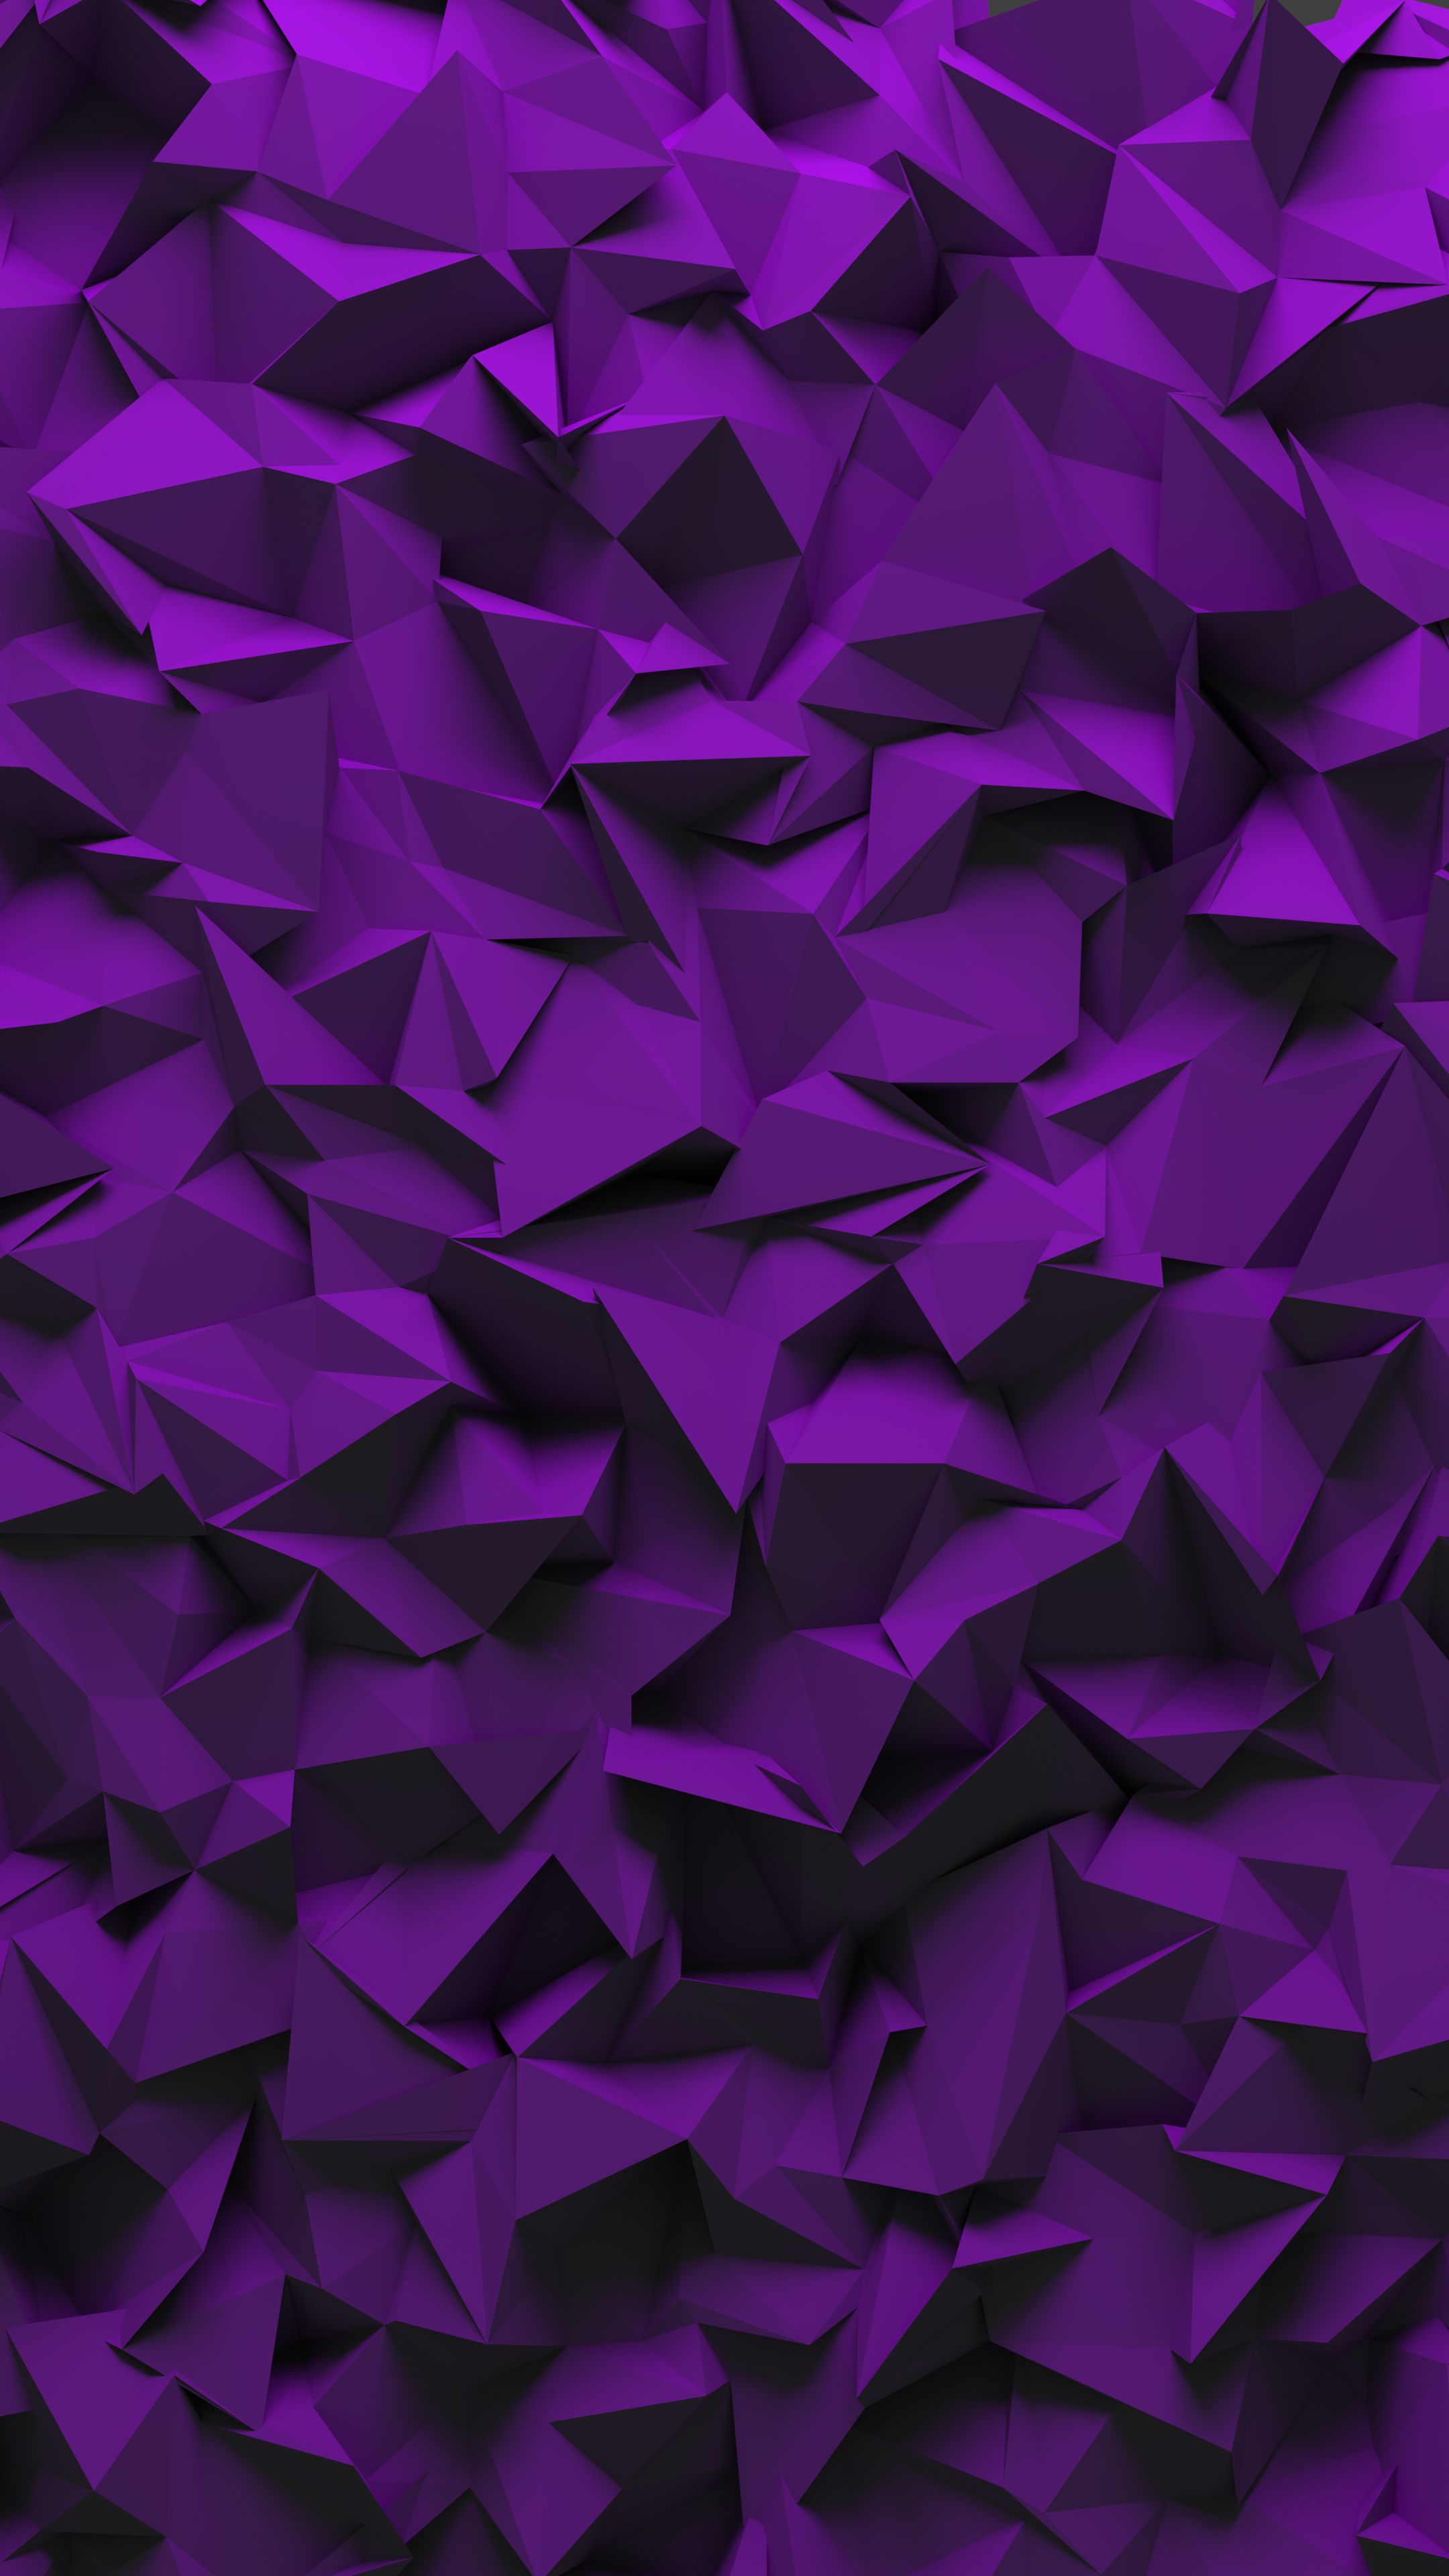 violet, triangles, textures, texture, purple, volume, fragments lock screen backgrounds